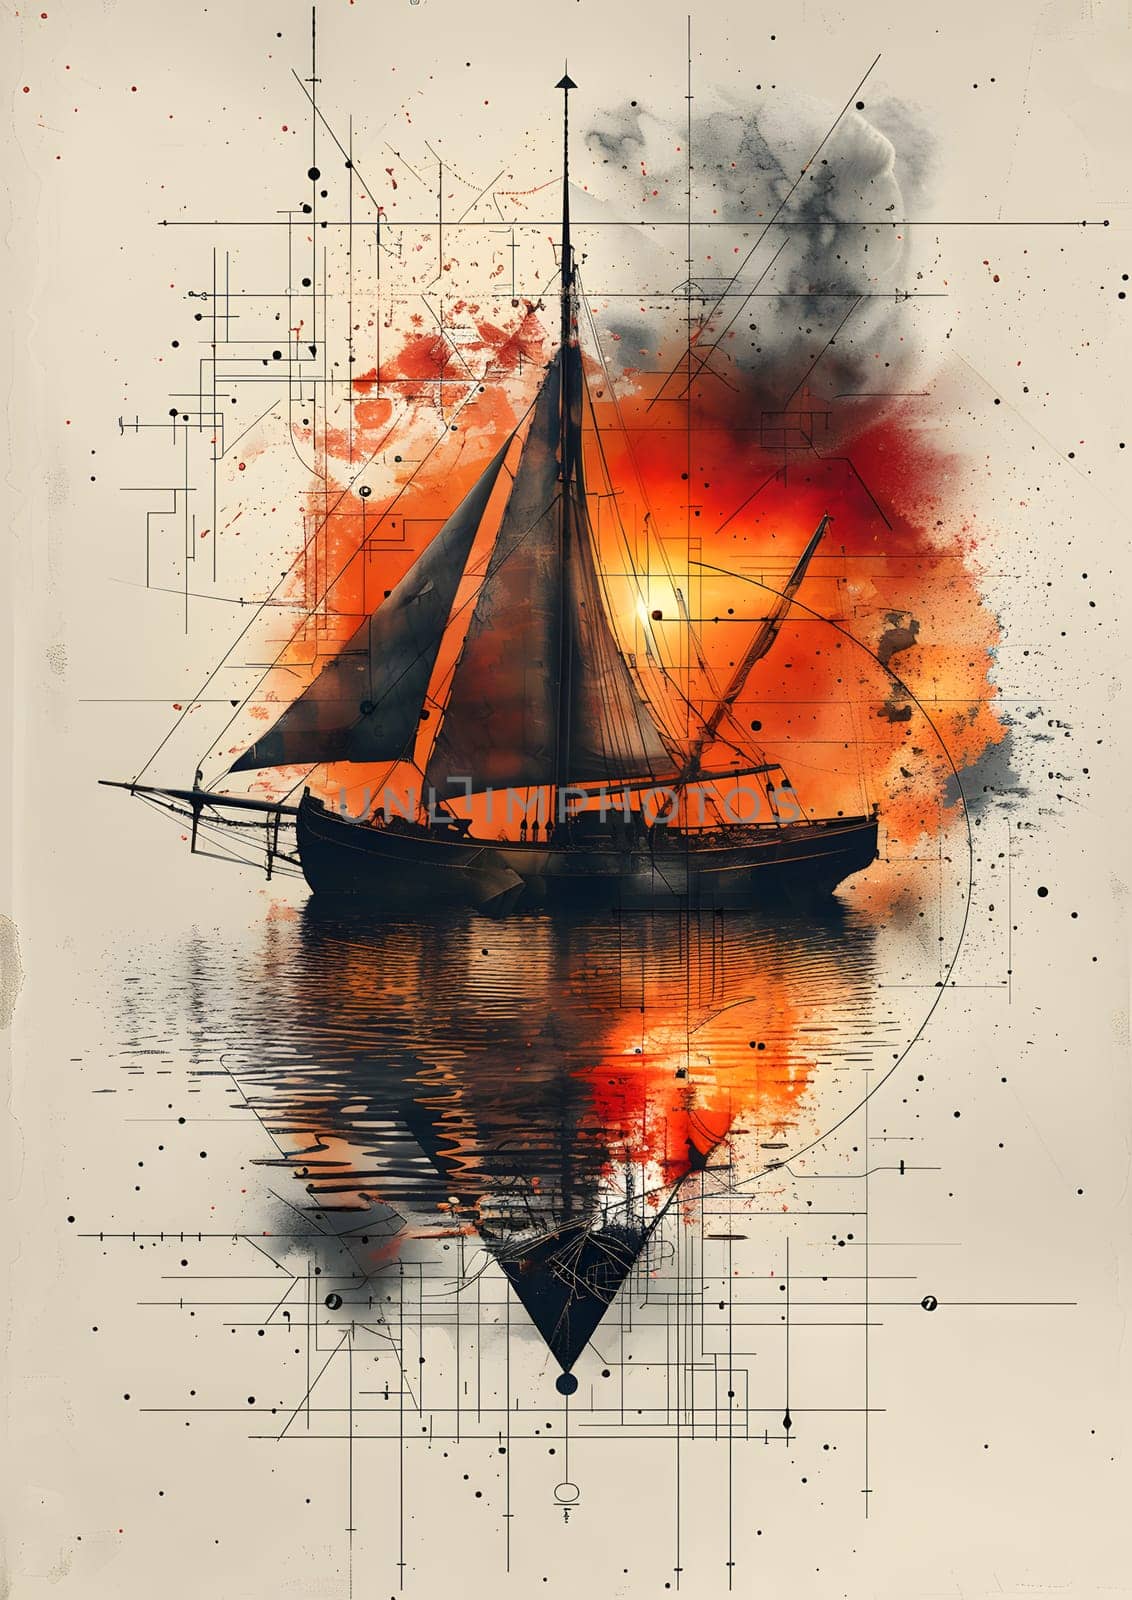 A stunning art piece showcasing a sailboat on the water, with a majestic mast and intricate details. The painting beautifully captures the essence of a peaceful day out on the boat